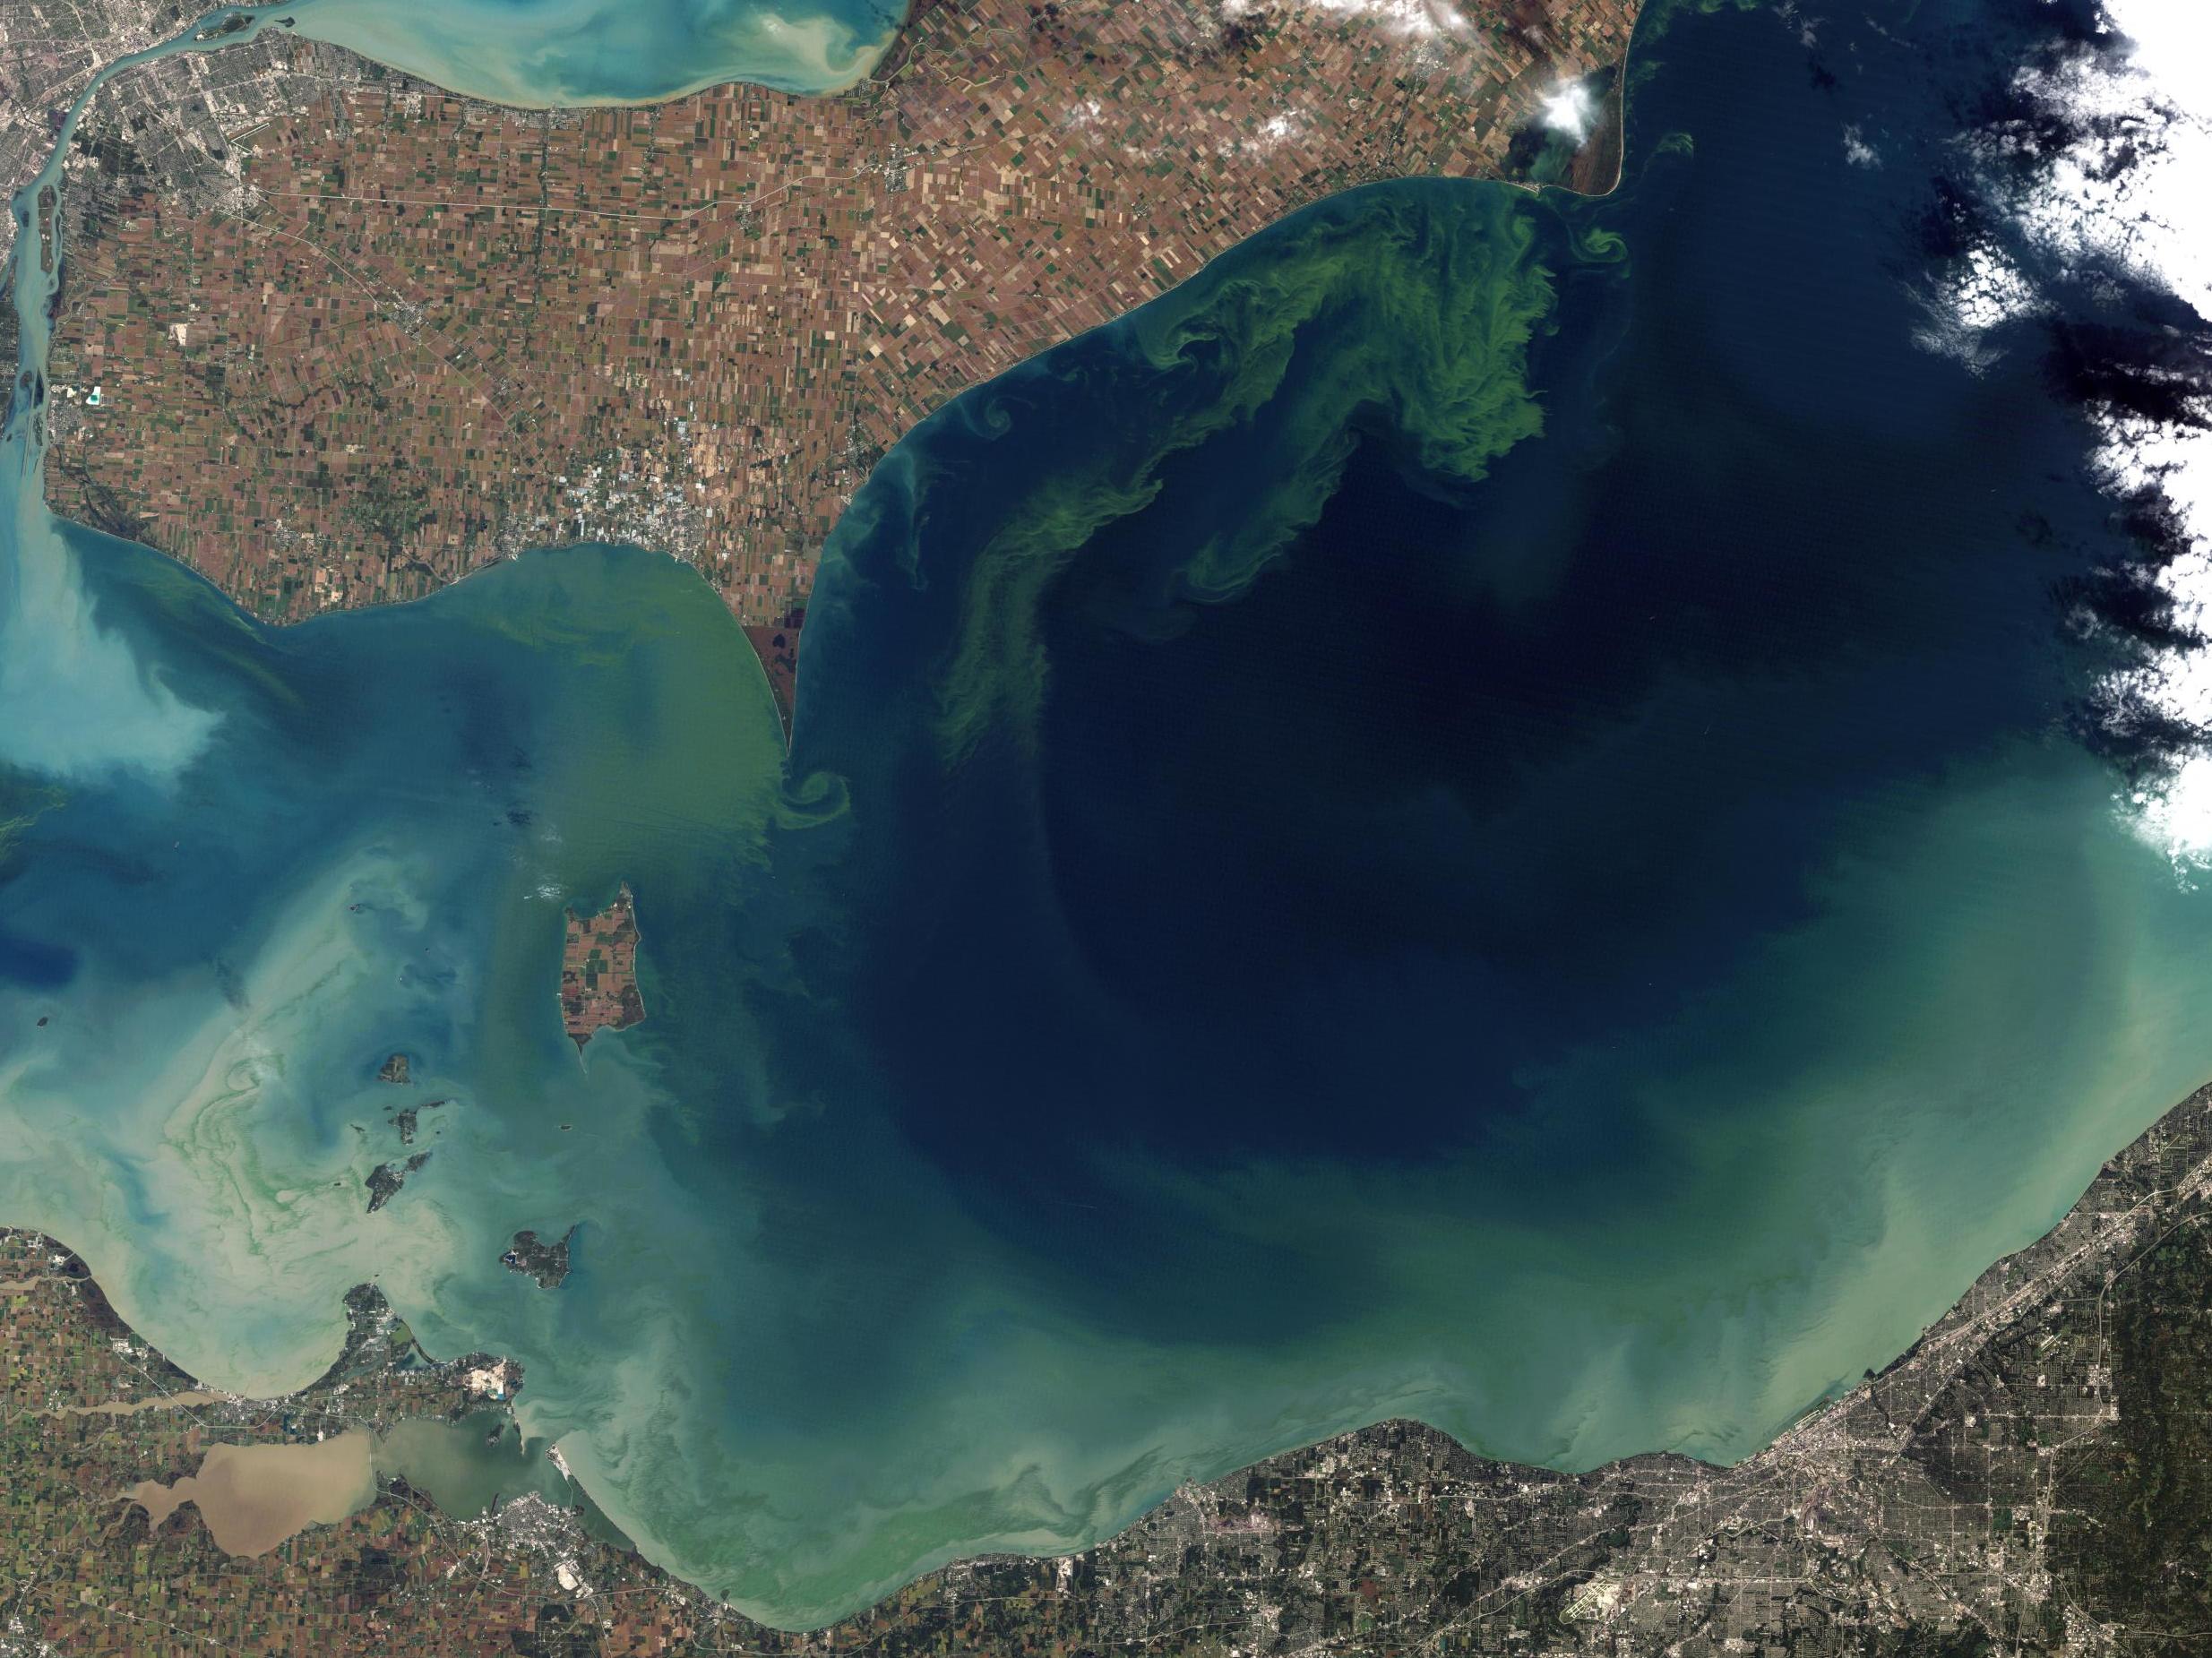 Some scientists say fertilising the ocean could destroy delicate ecosystems. Pictured is an algae bloom in Lake Erie